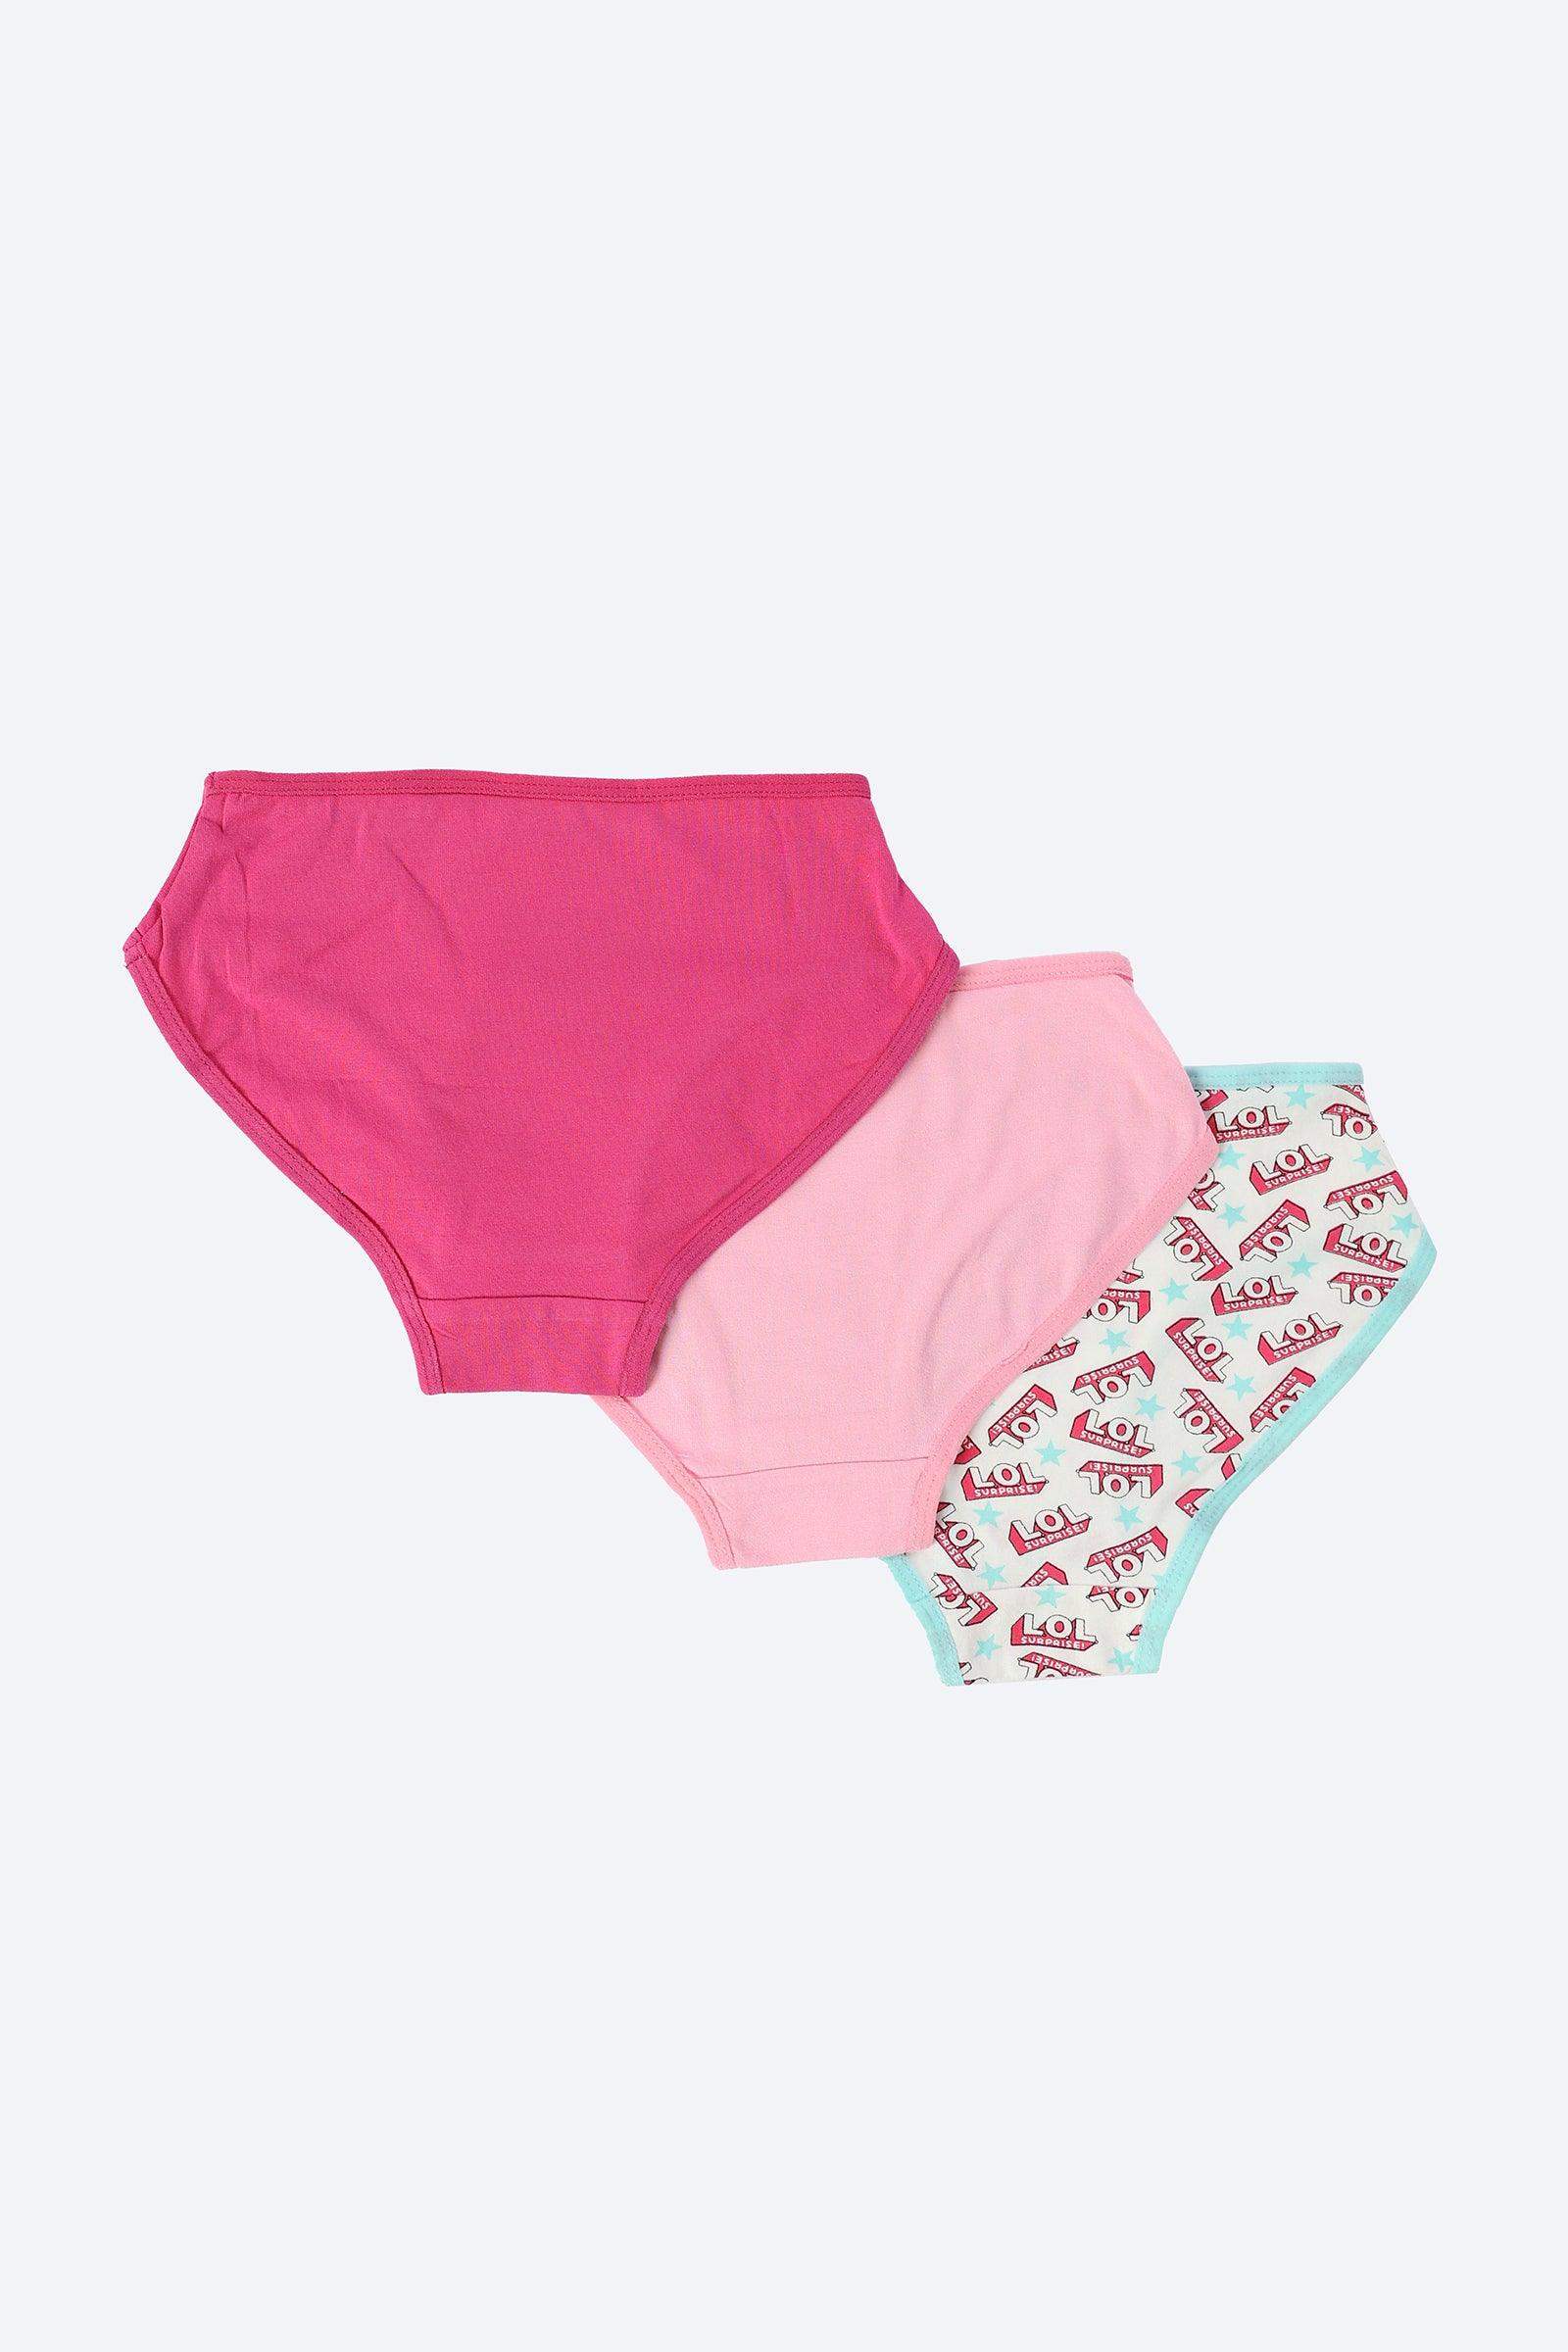 Carina Pack Of 7 Brief Panties For Girls @ Best Price Online